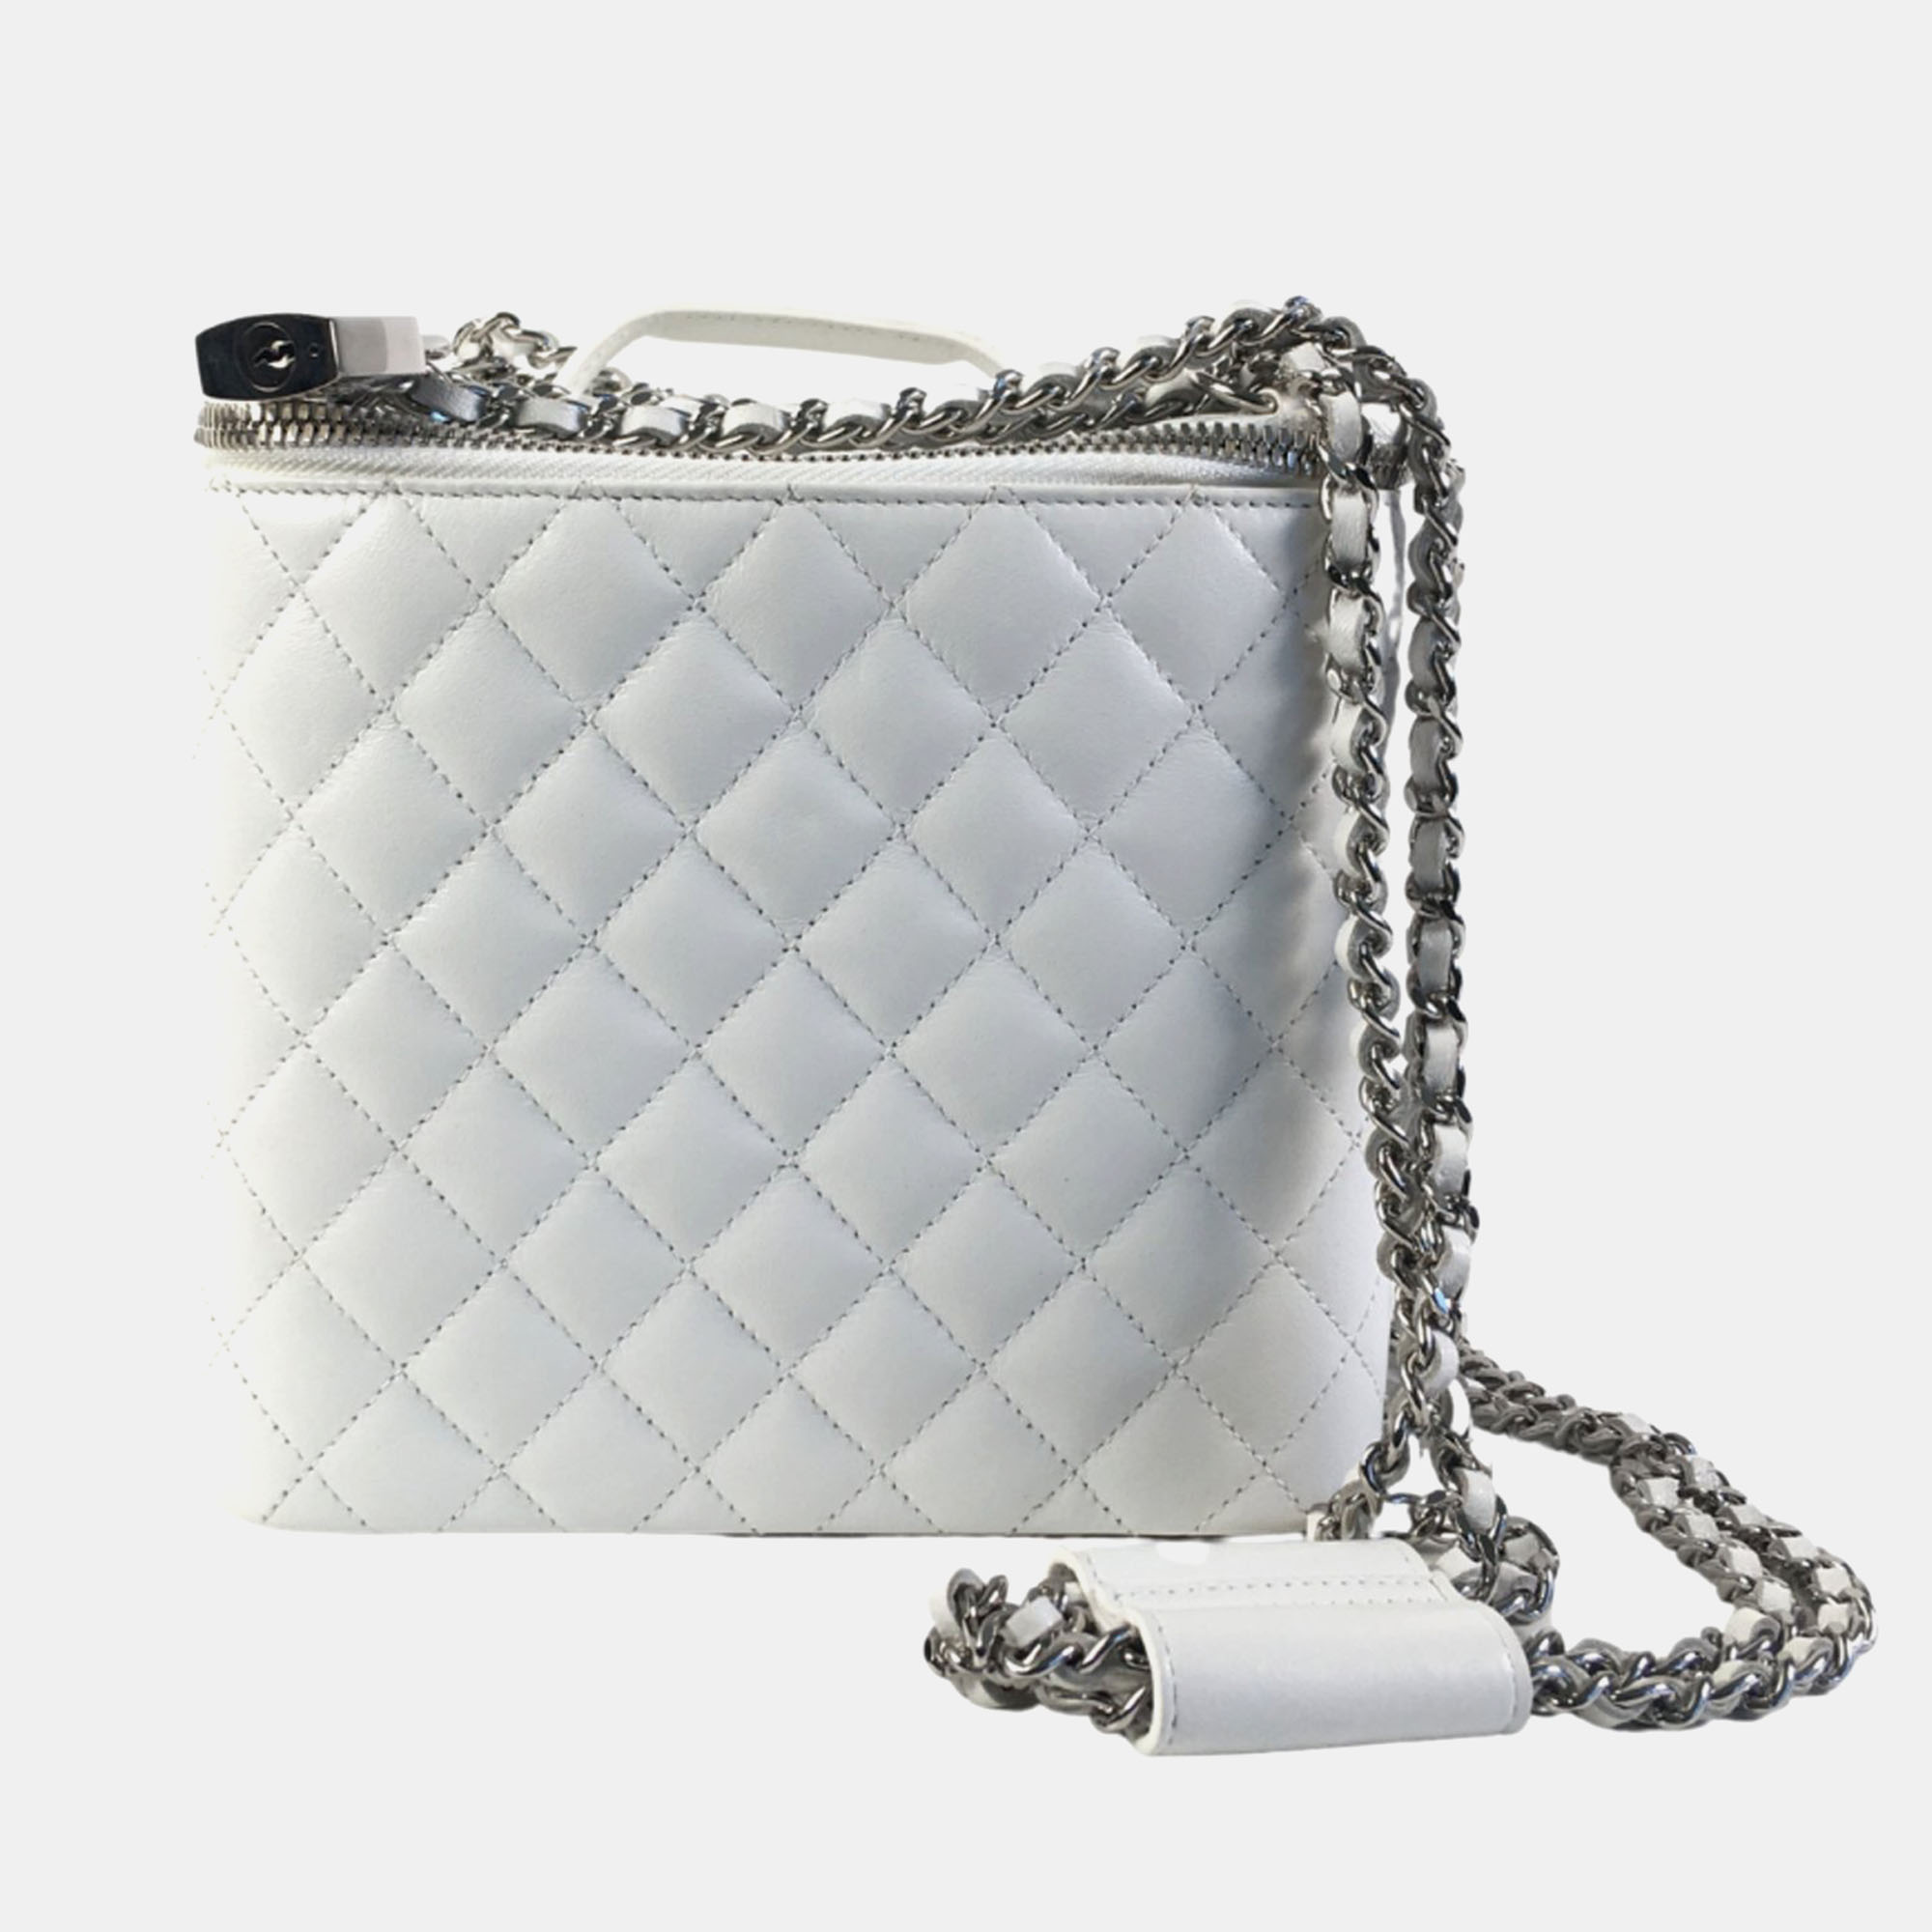 Chanel white lambskin quilted vanity case